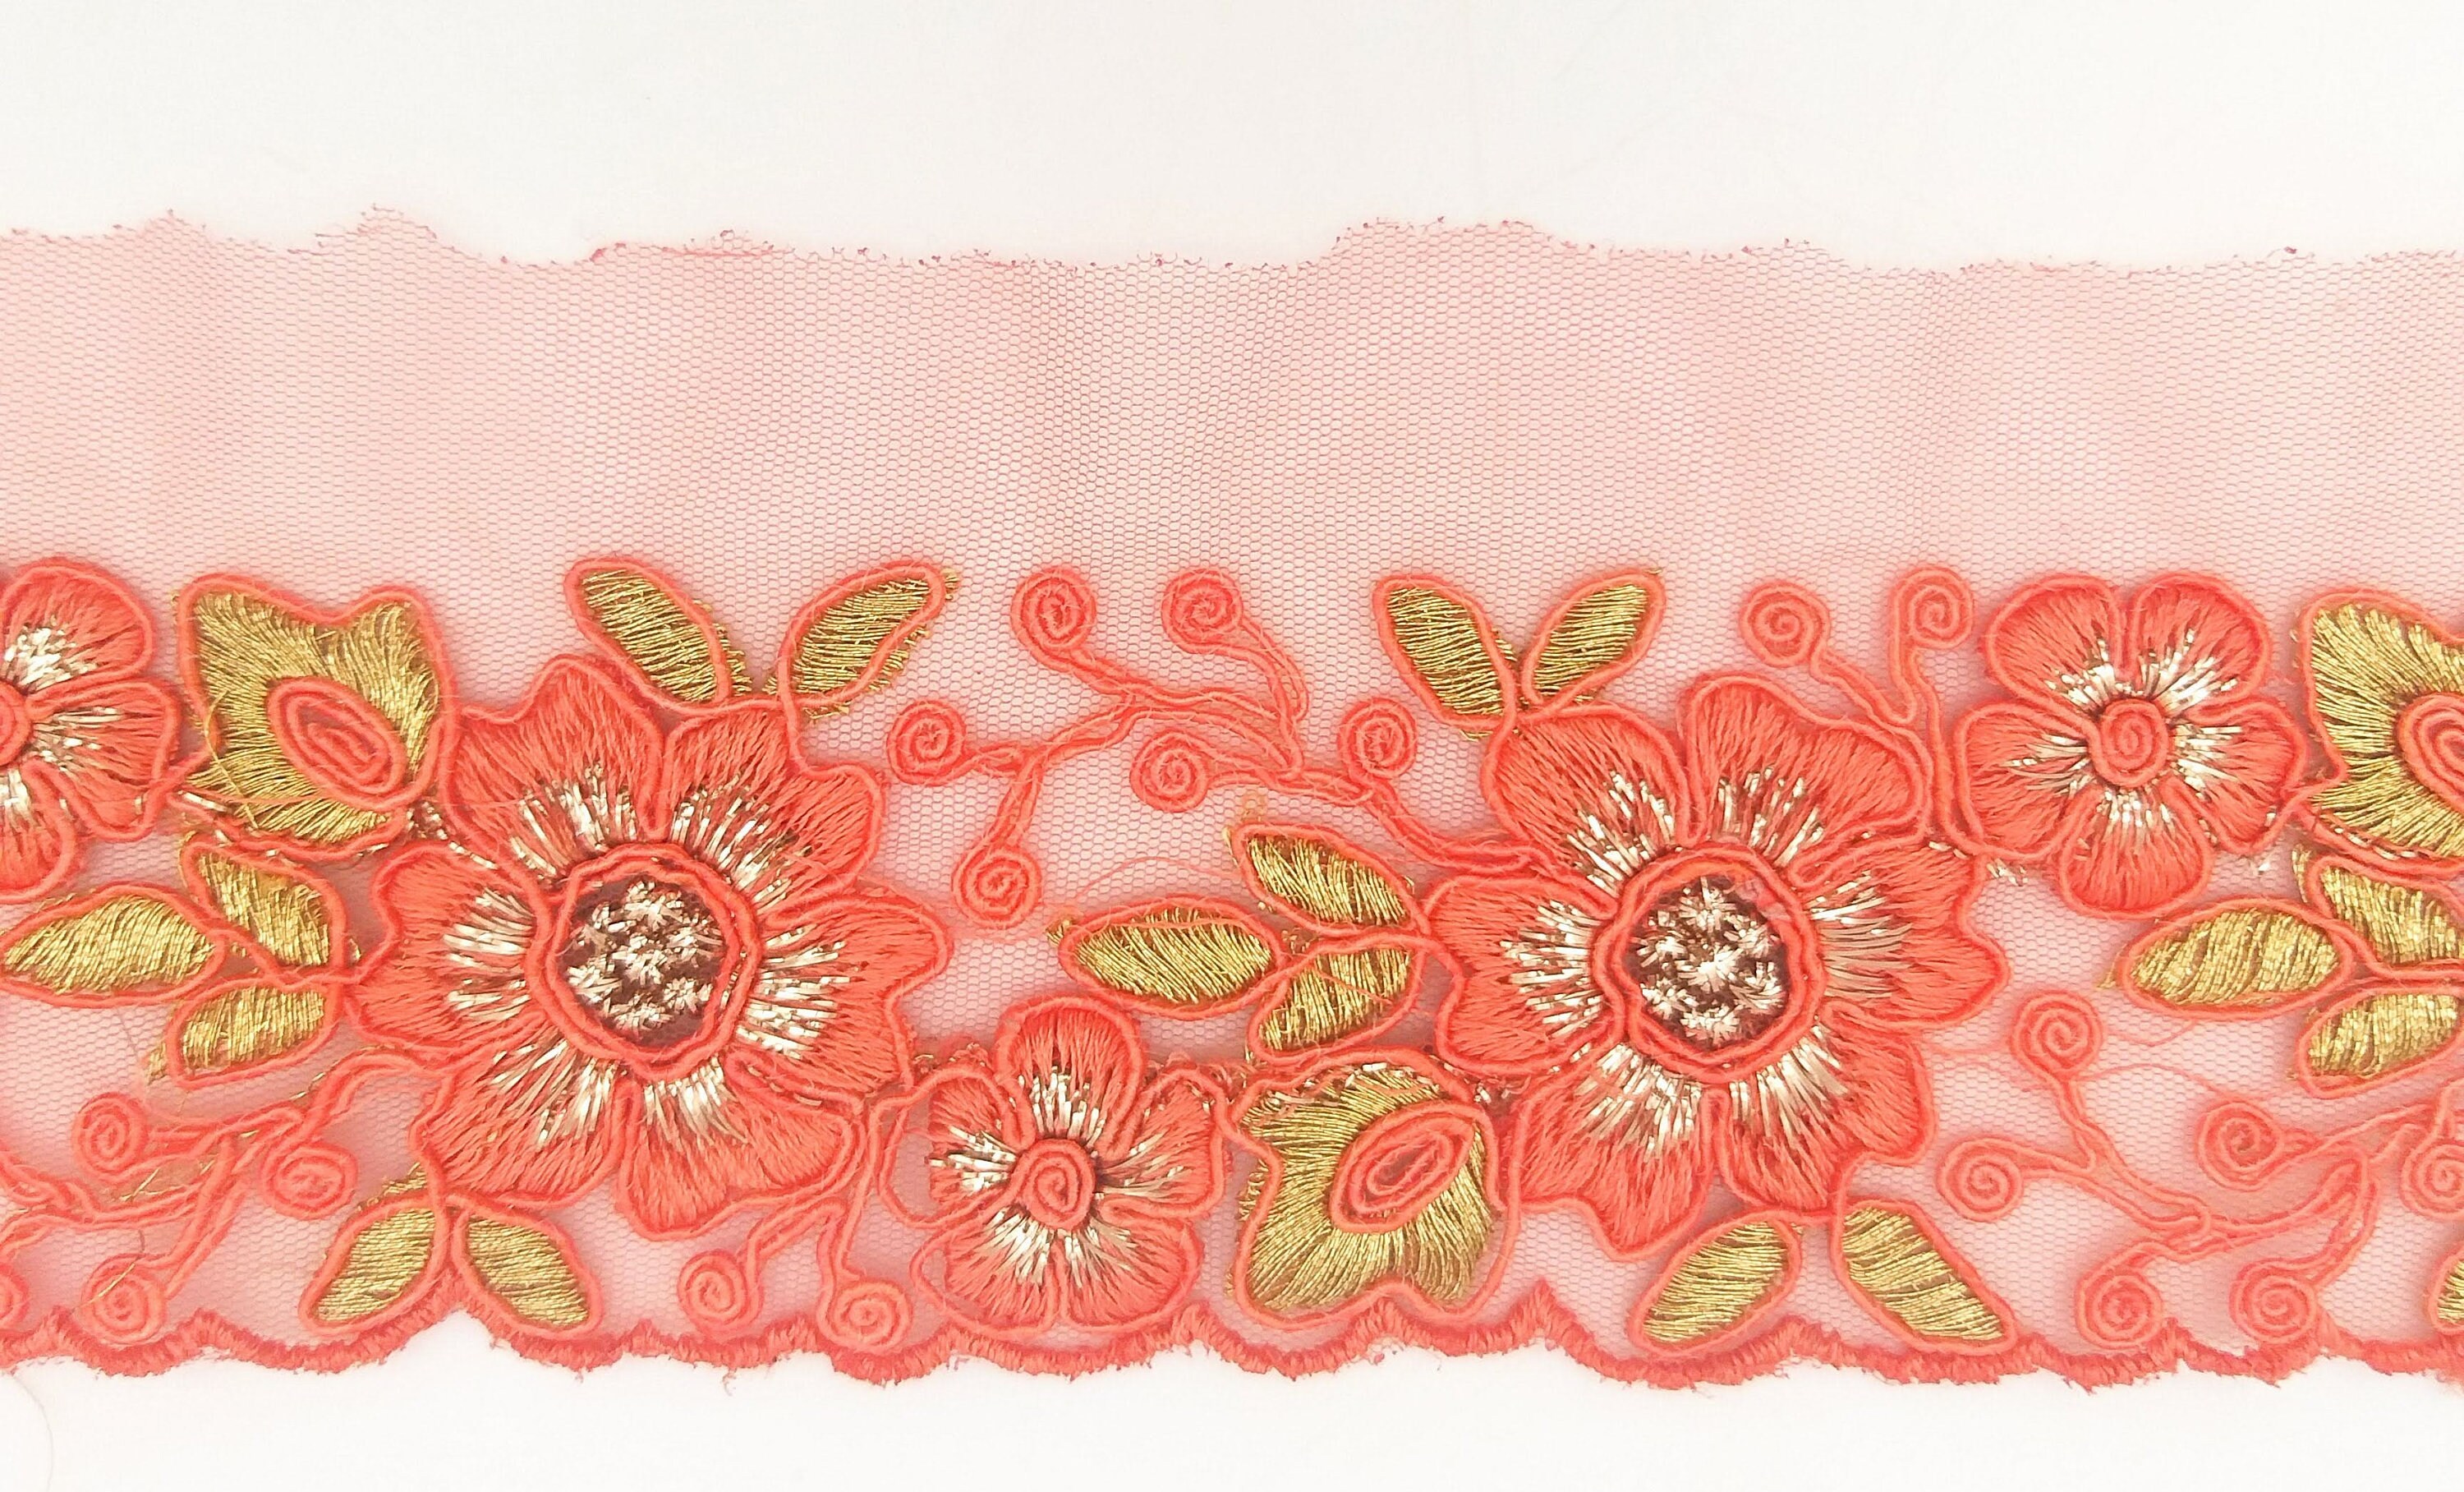 Flamingo Orange Net Fabric Lace Trim With Floral Embroidery in Orange and  Gold, Lace Trim, Sari Border, Embroidered Trim, Trim by Yard -  Canada